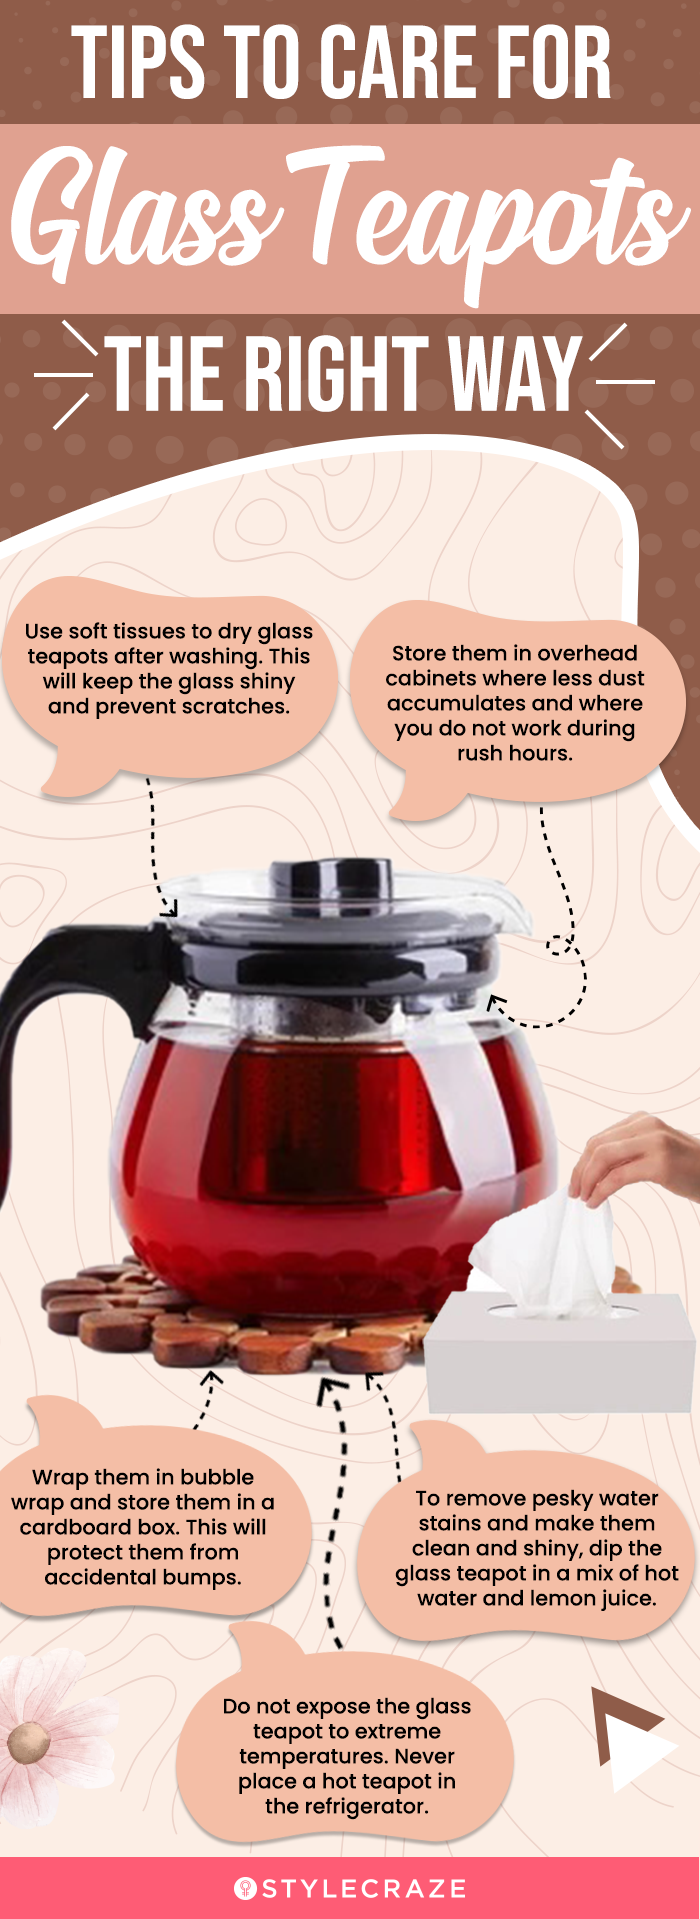 Tips To Care For Glass Teapots The Right Way (infographic)